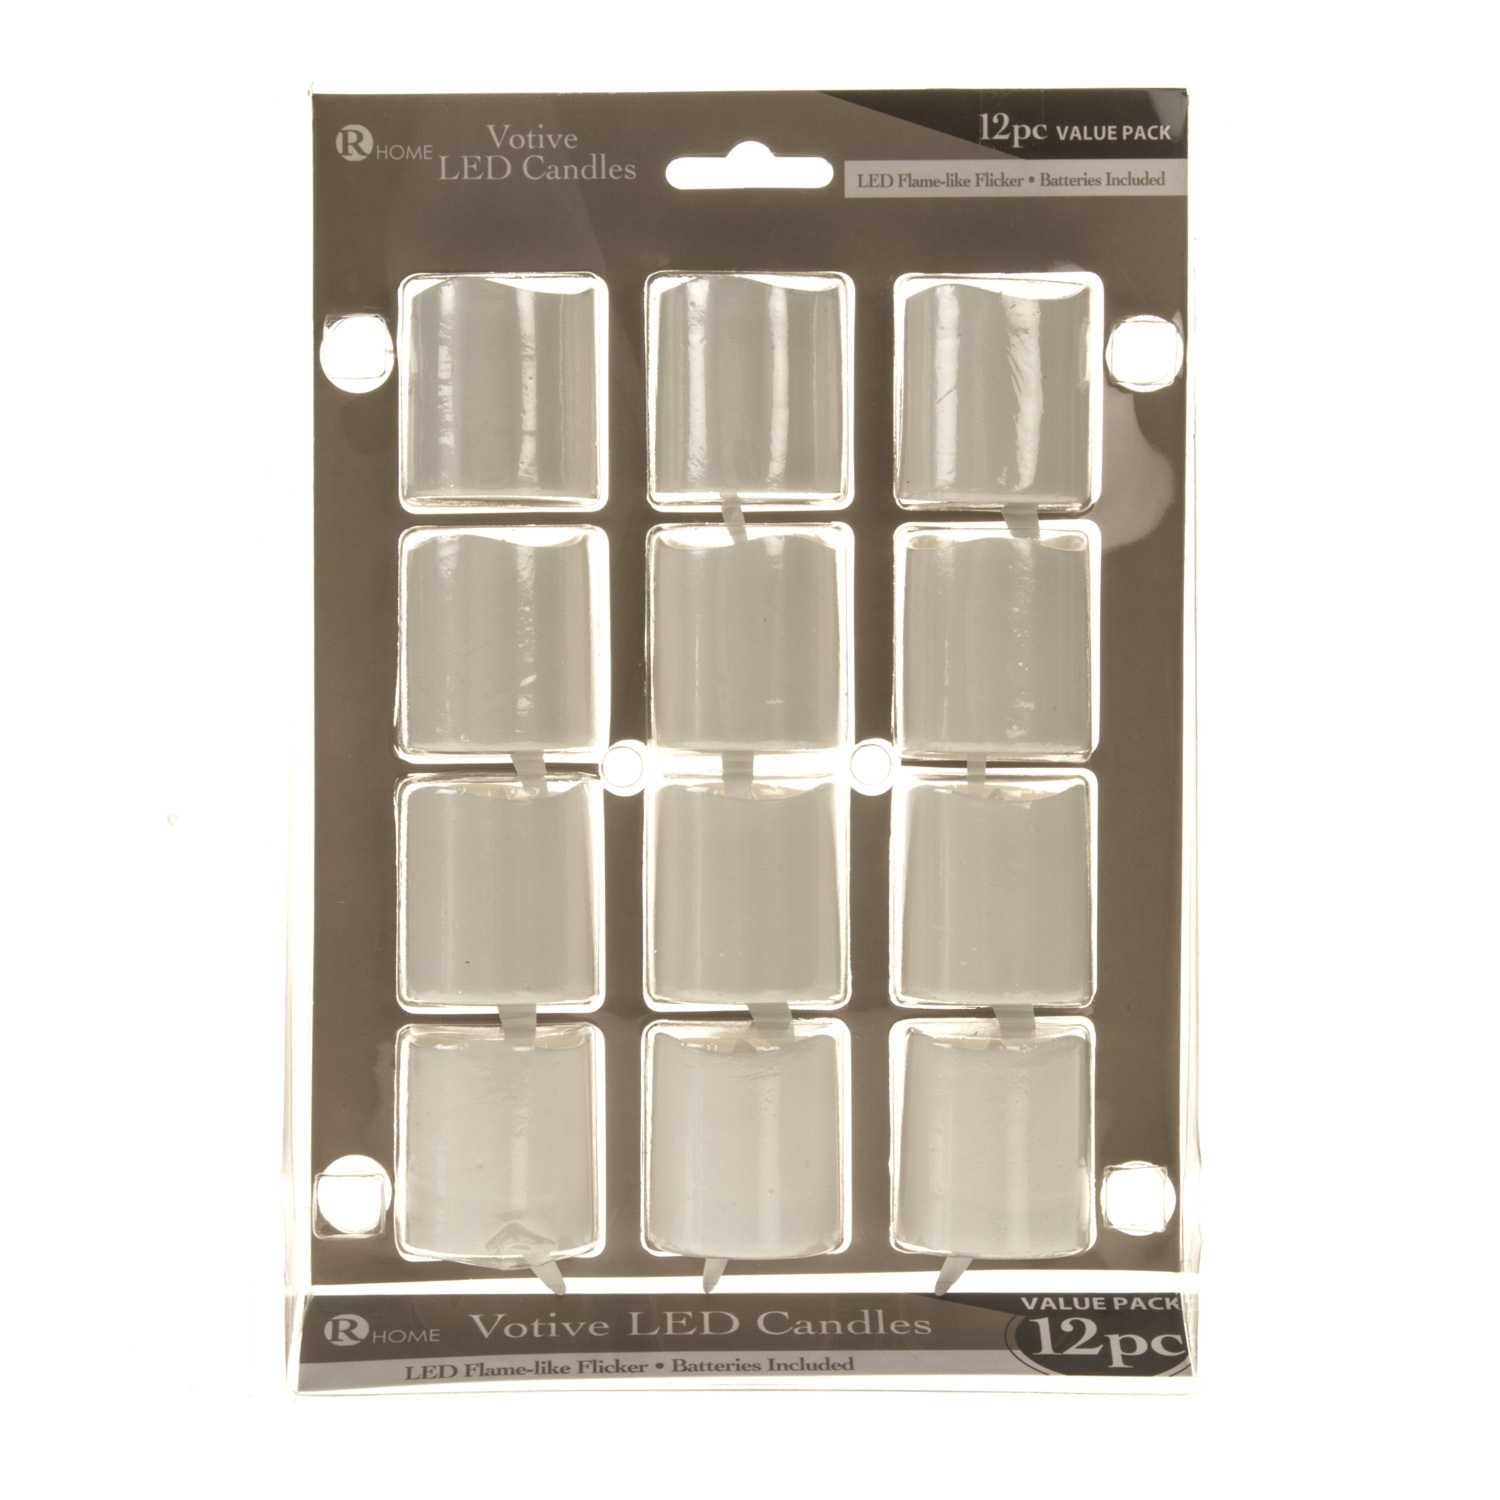 R Home White Flameless LED Candles 12 Pack Image